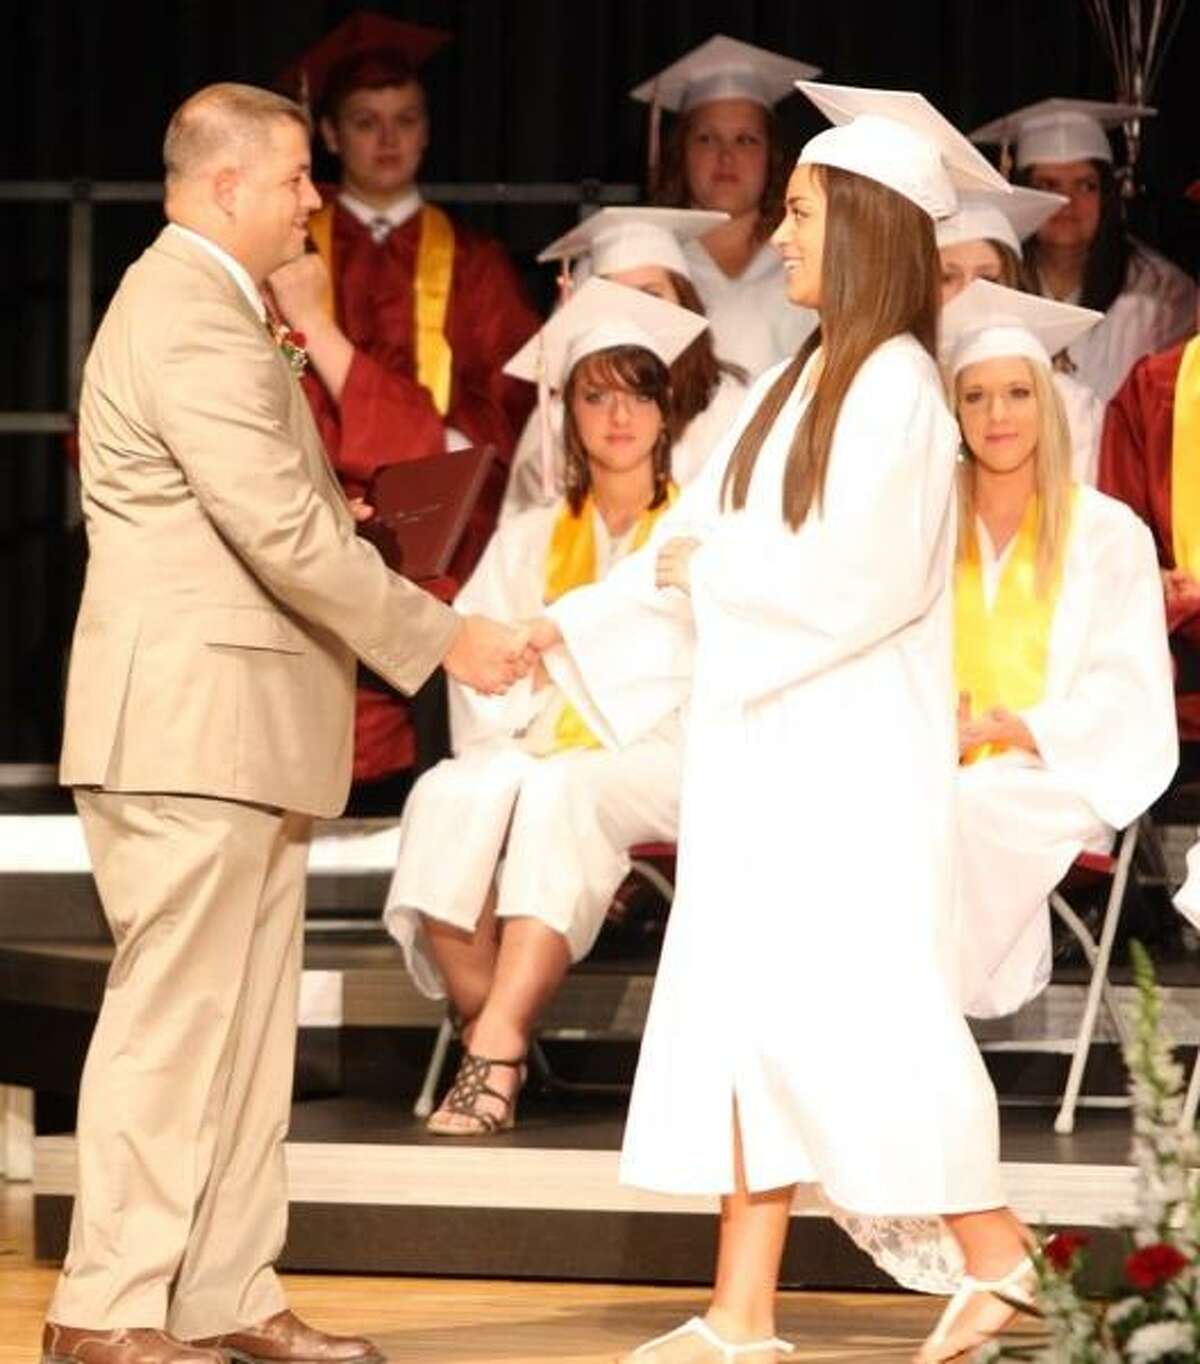 JOHN HAEGER @ONEIDAPHOTO ON TWITTER/ONEIDA DAILY DISPATCH Mariah Beauvais shakes the hand of Jacob Byron Board of Education President after receiving her diploma during 85th commencements at SVCS on Friday, June 21, 2013 in Munnsville.